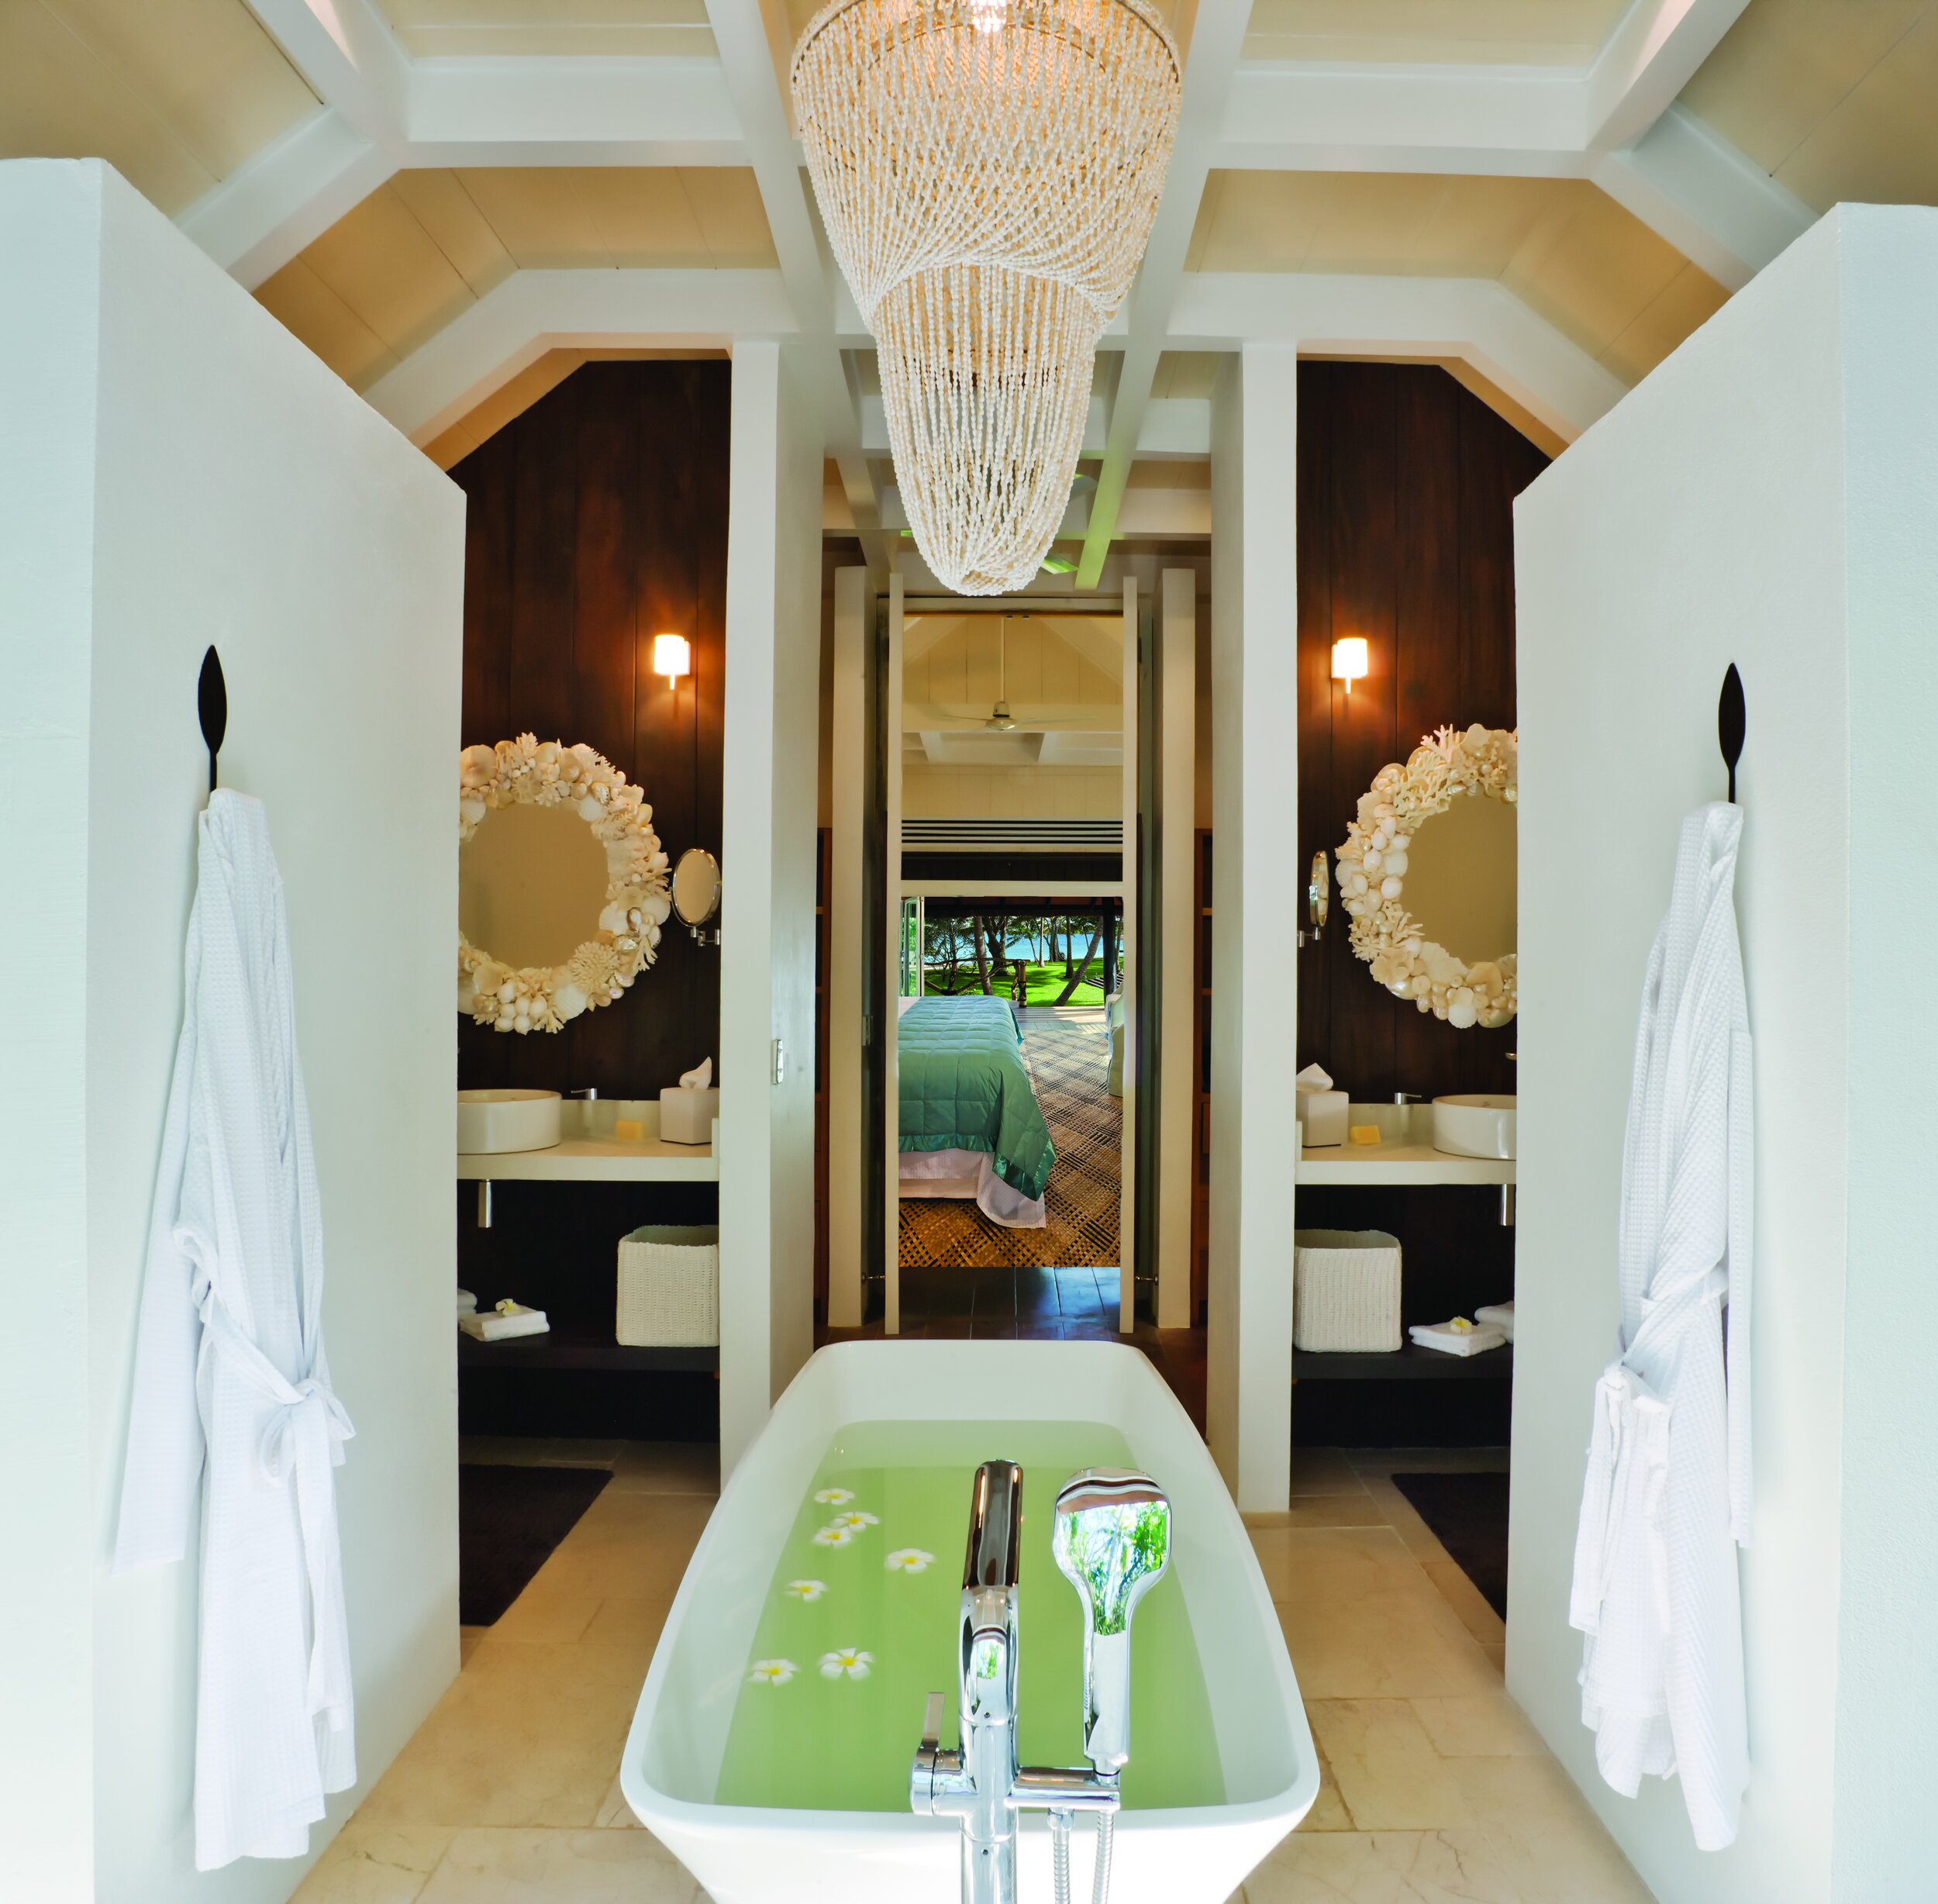 Bathrooms Are Beautifully Appointed_53100 (002).jpg